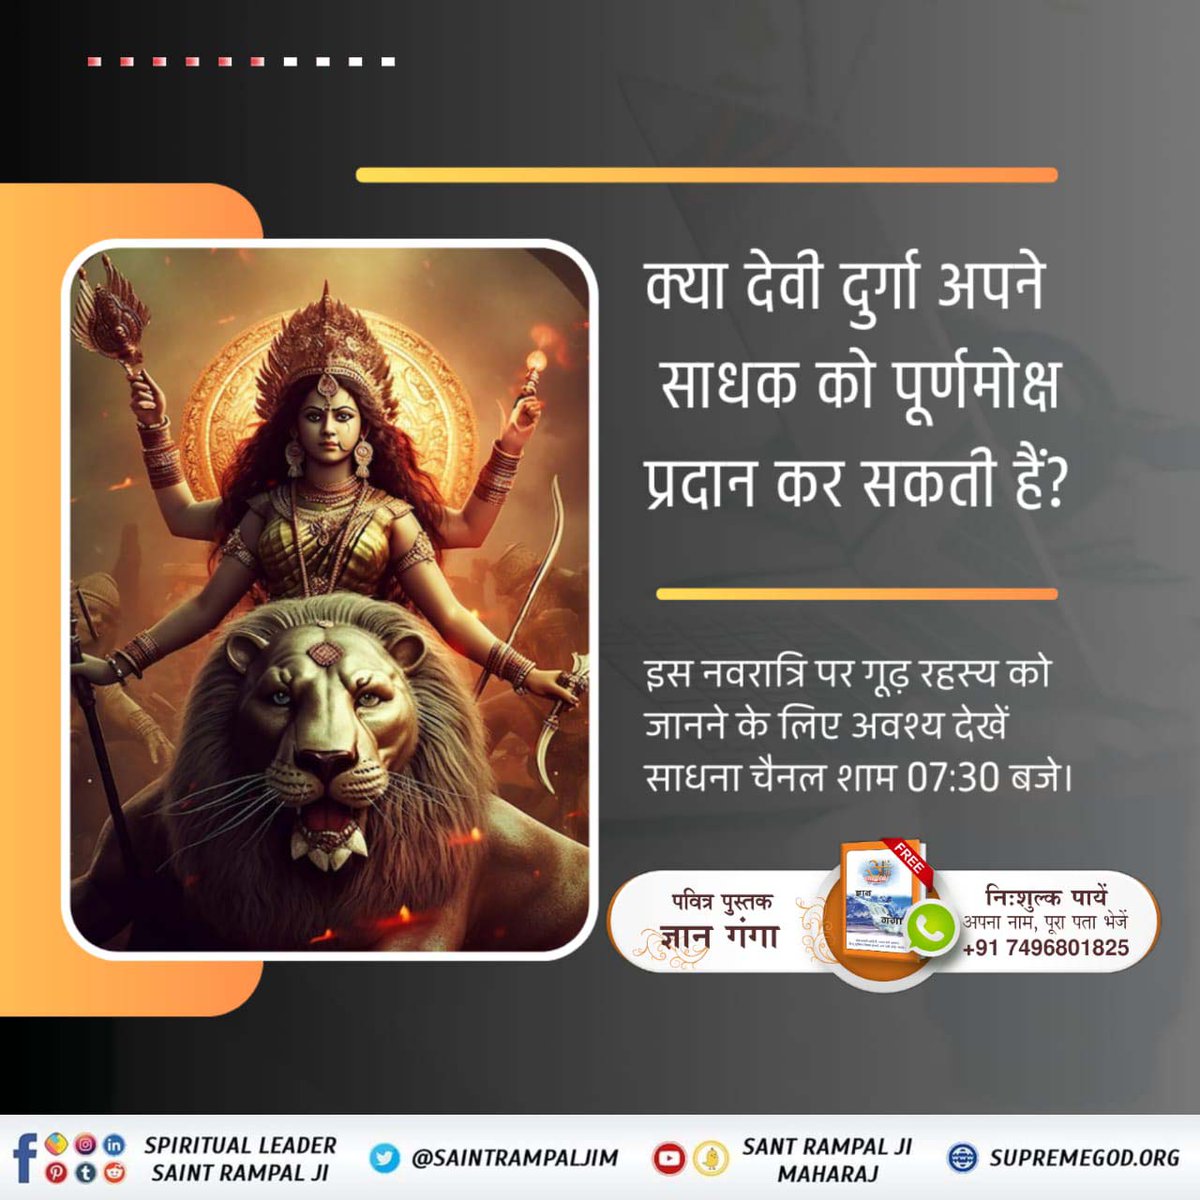 Maa Durga Ji is not Supreme power who can grant Salvation. If you wish to achieve ultimate peace and salvation, must worship Supreme Lord Kabir Saheb Ji and chant correct mantras as mentioned in our own Holy Scriptures. #भूखेबच्चेदेख_मां_कैसे_खुश_हो